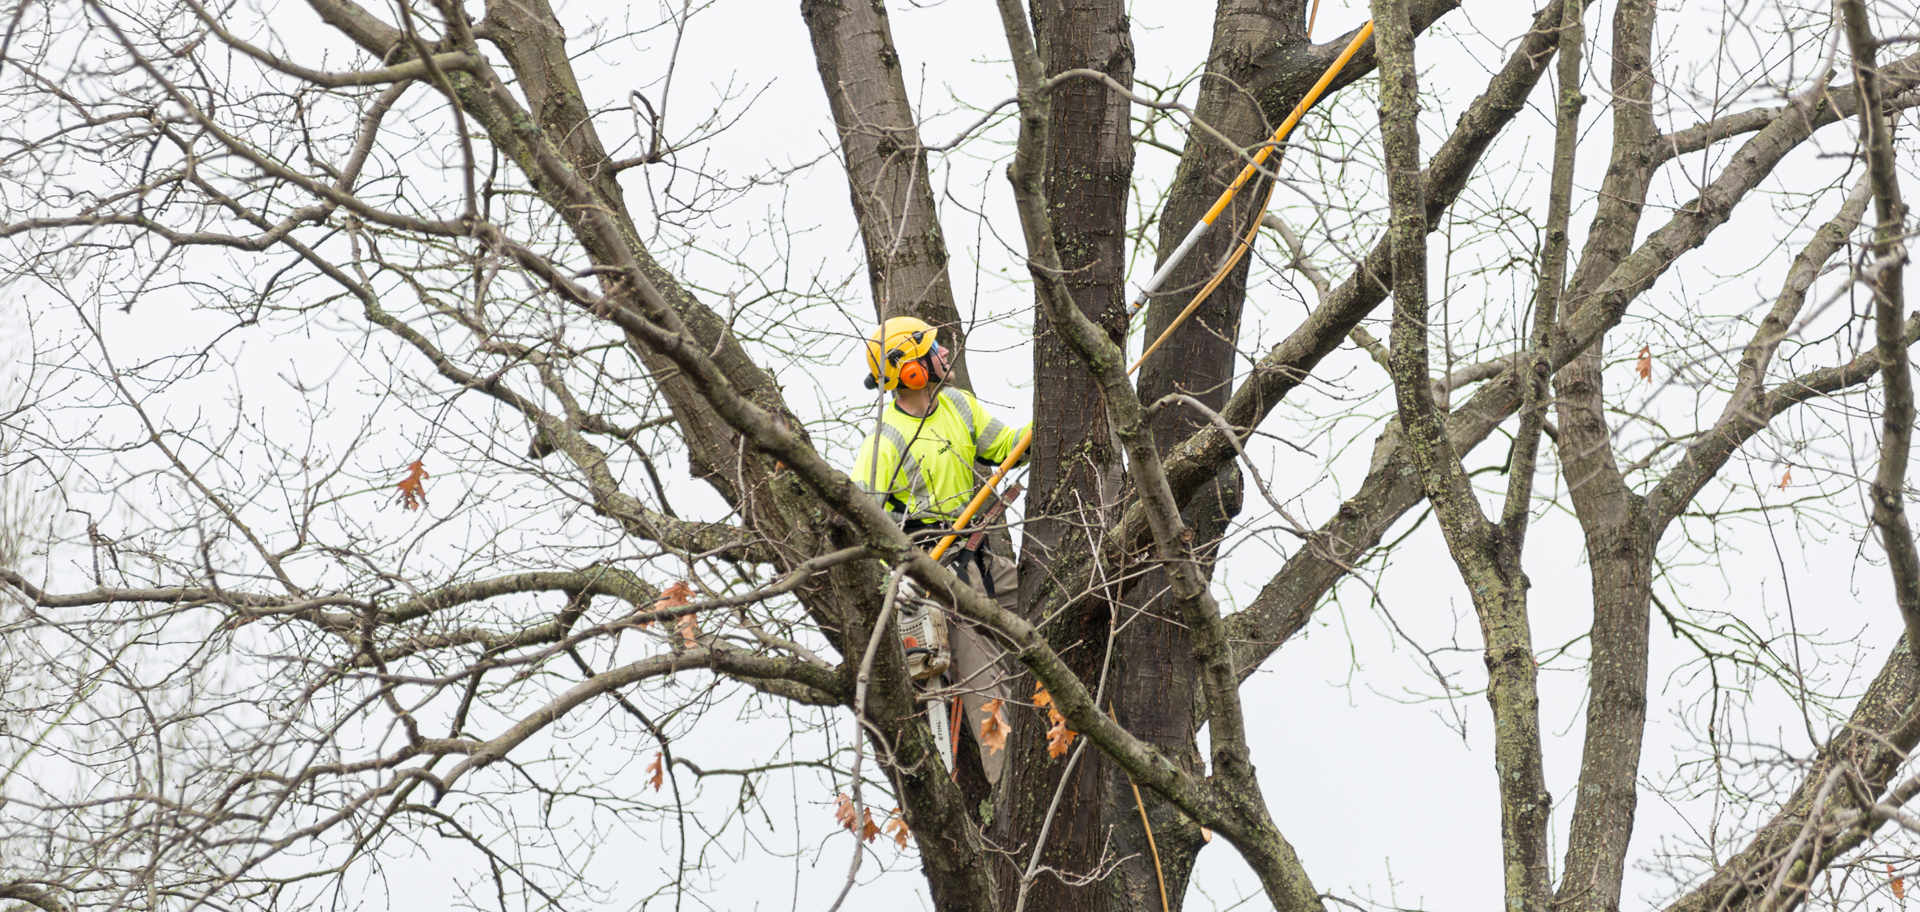 Winter Tree Care, Protection and Identification - Department of Lands